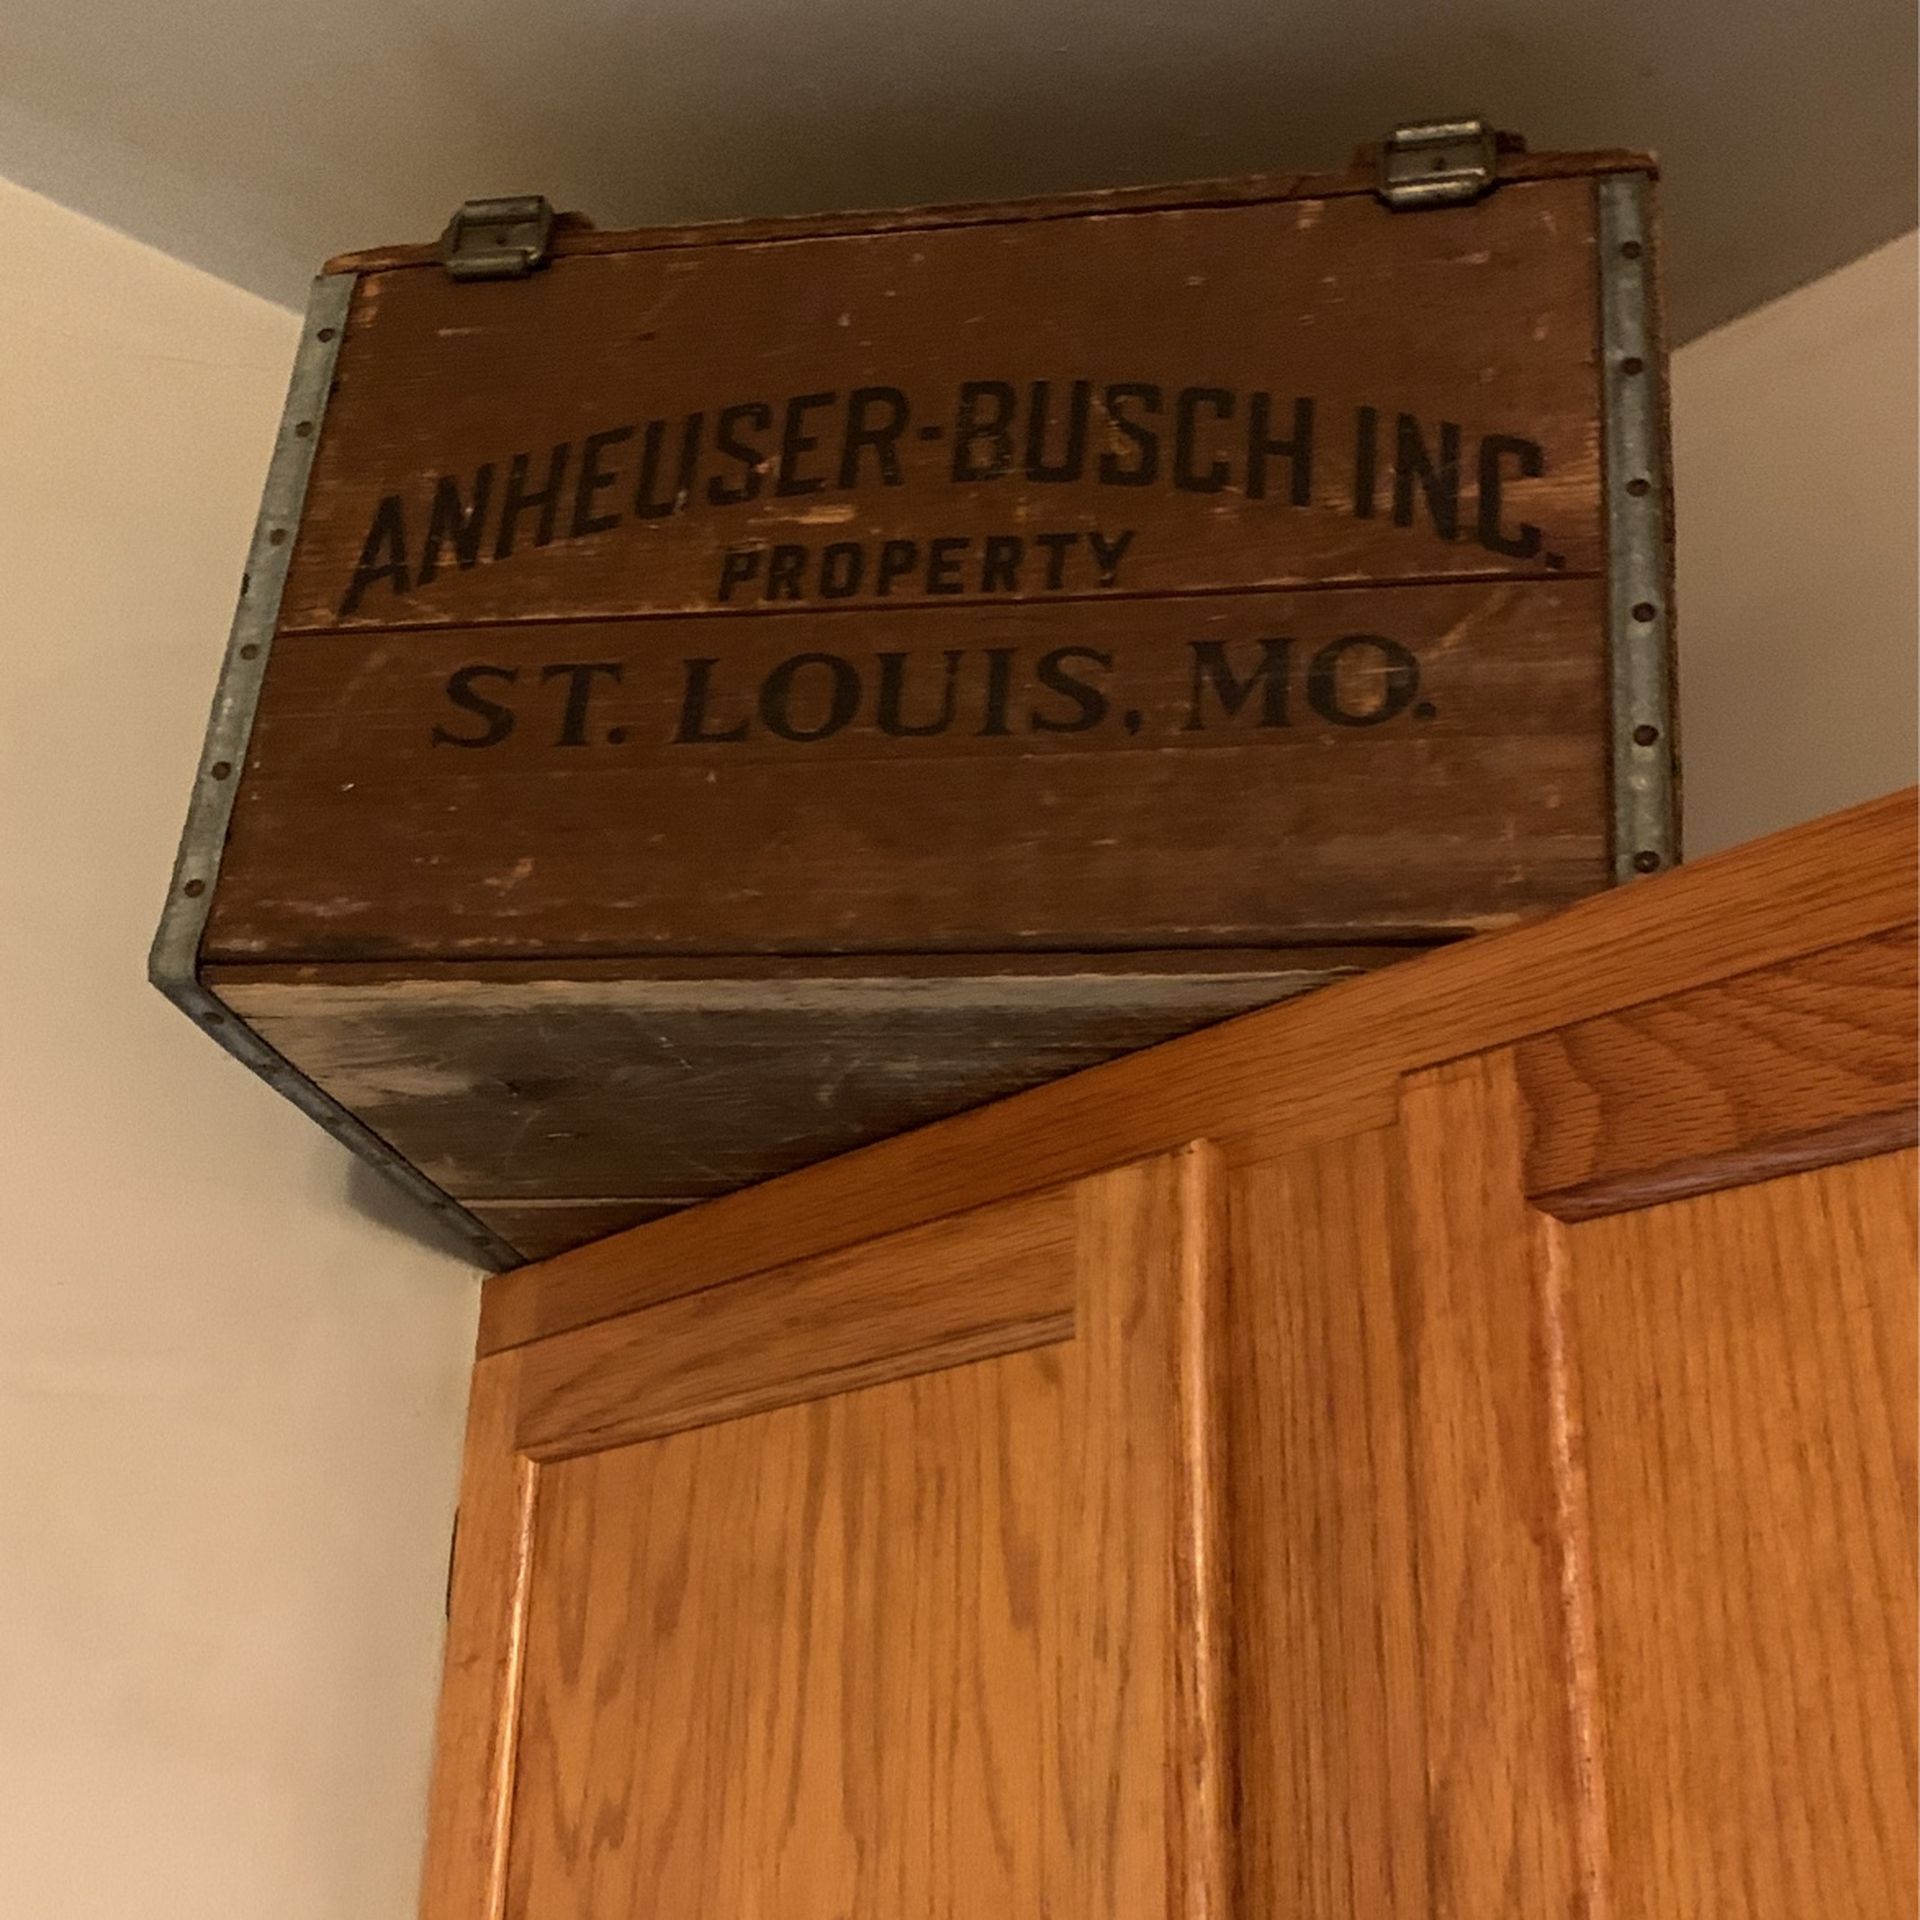 Anheuser Busch Wooden Crate For Beer Bottle’s 